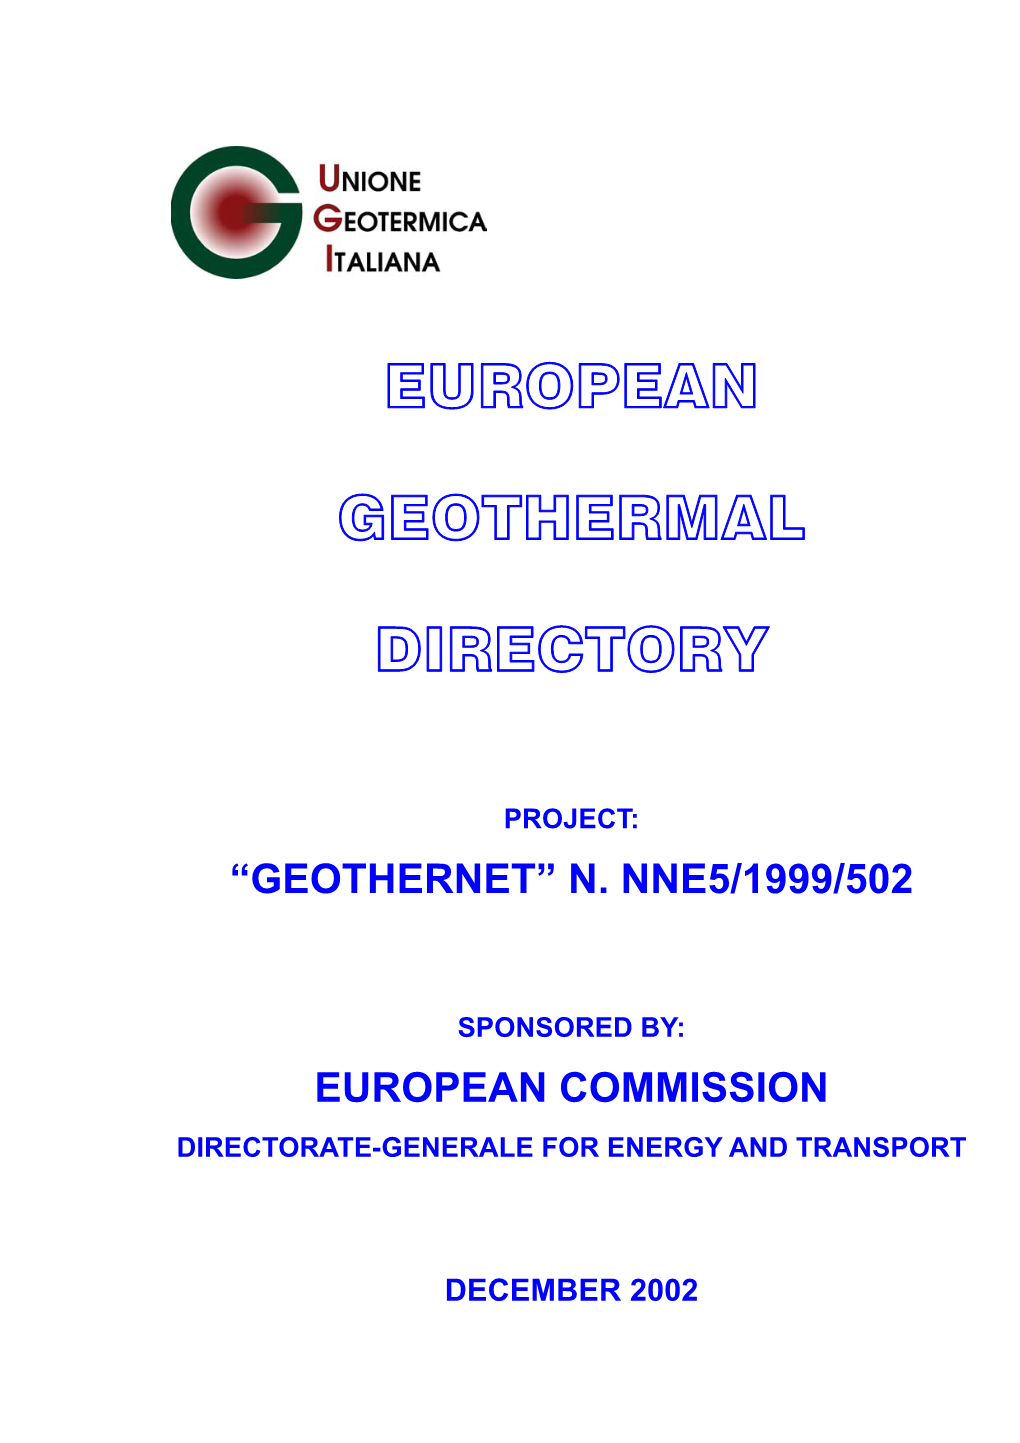 European Geothermal Directory Has Been Proposed to EC by GTV (German Geothermal Association) , UGI (Italian Geothermal Union) and EGEC (European Geothermal Council)